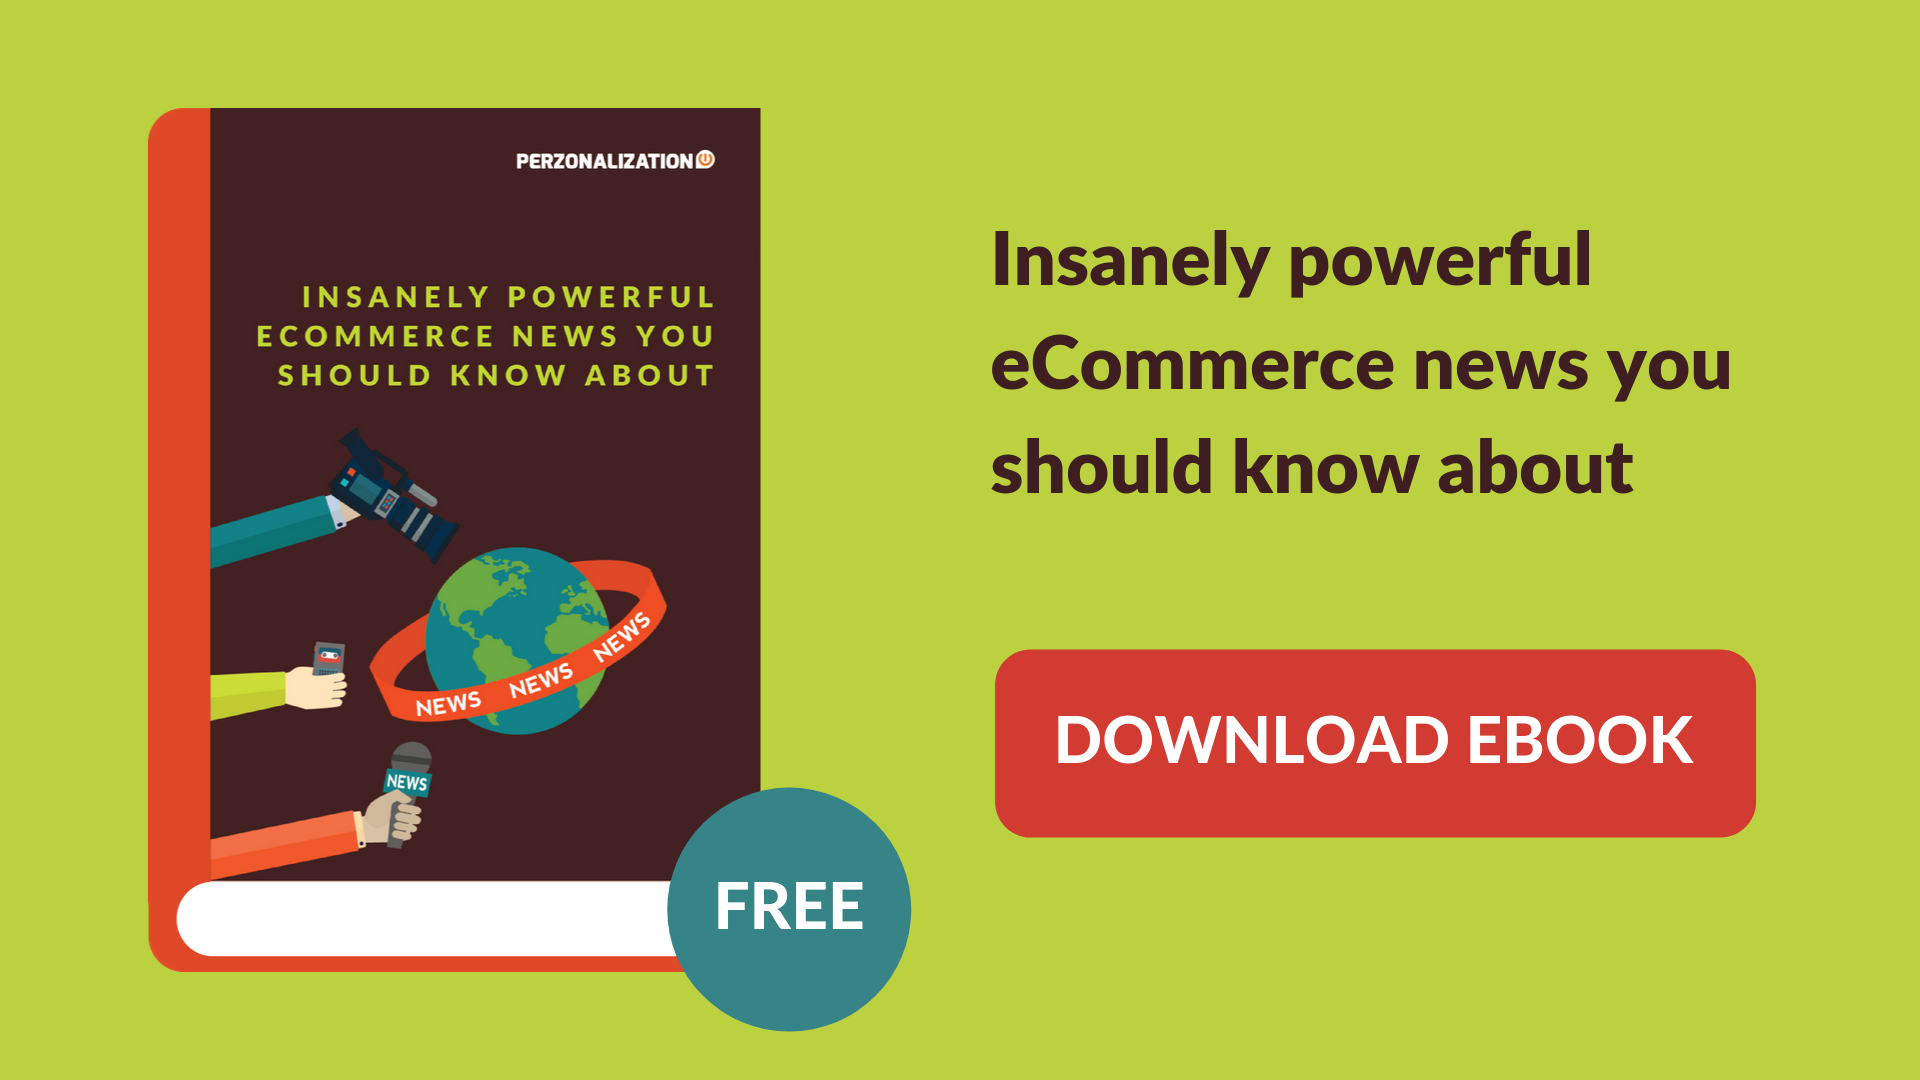 Download free ebook: eCommerce news